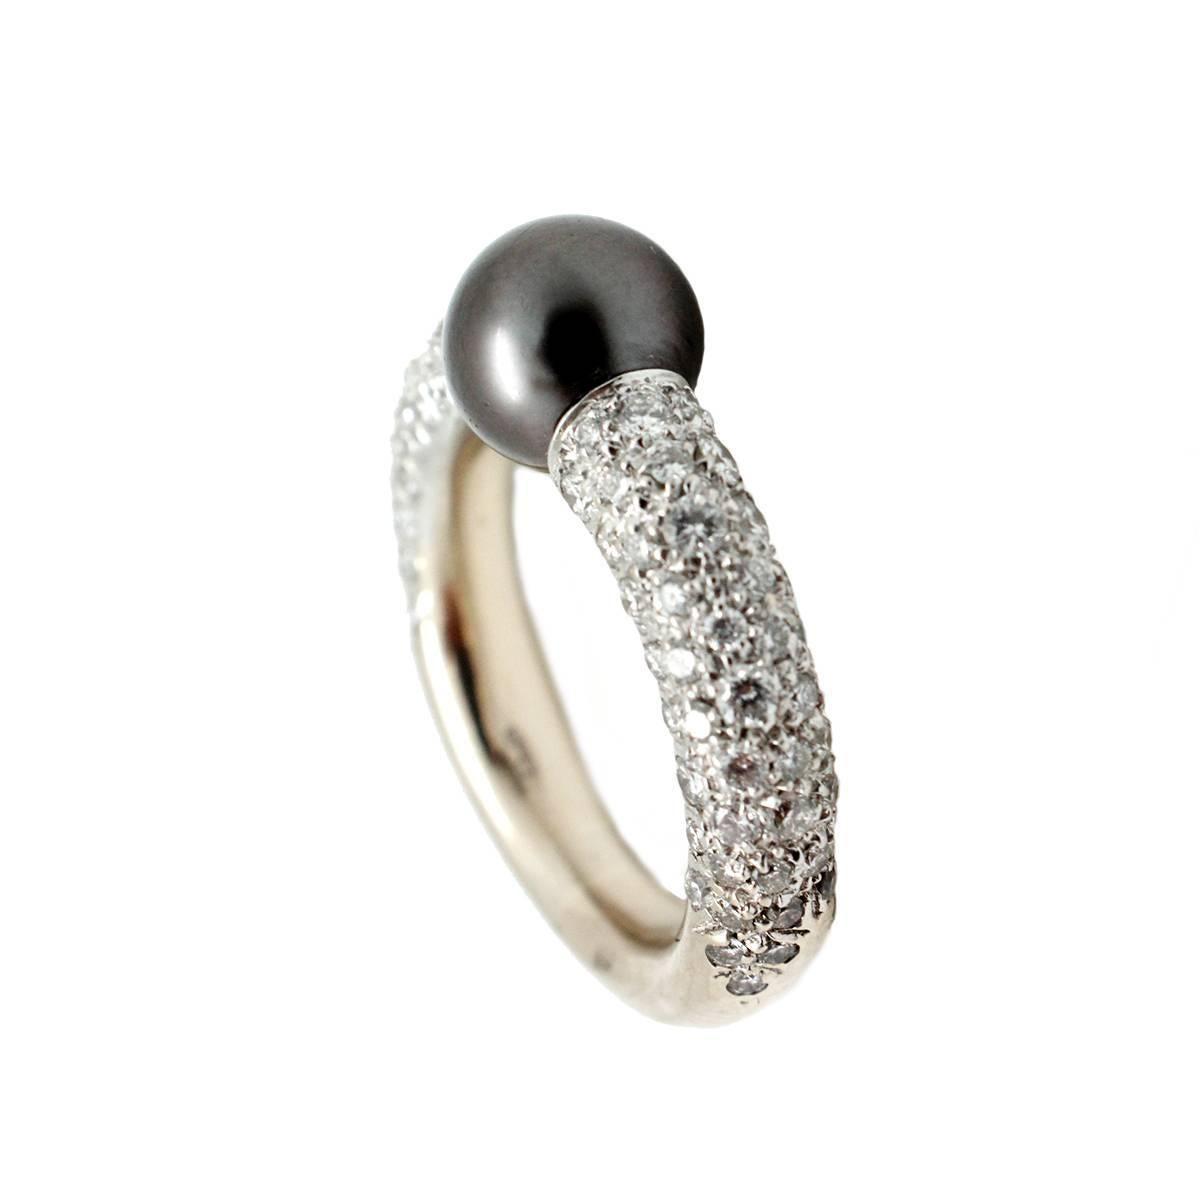 This stunning signed ring is made in 18k white gold by Mikimoto. It features an 8.3mm Tahitian black pearl as the center stone surrounded by brilliantly set pave diamonds in the band. In this gorgeous piece there are approximately 1.35 carats of